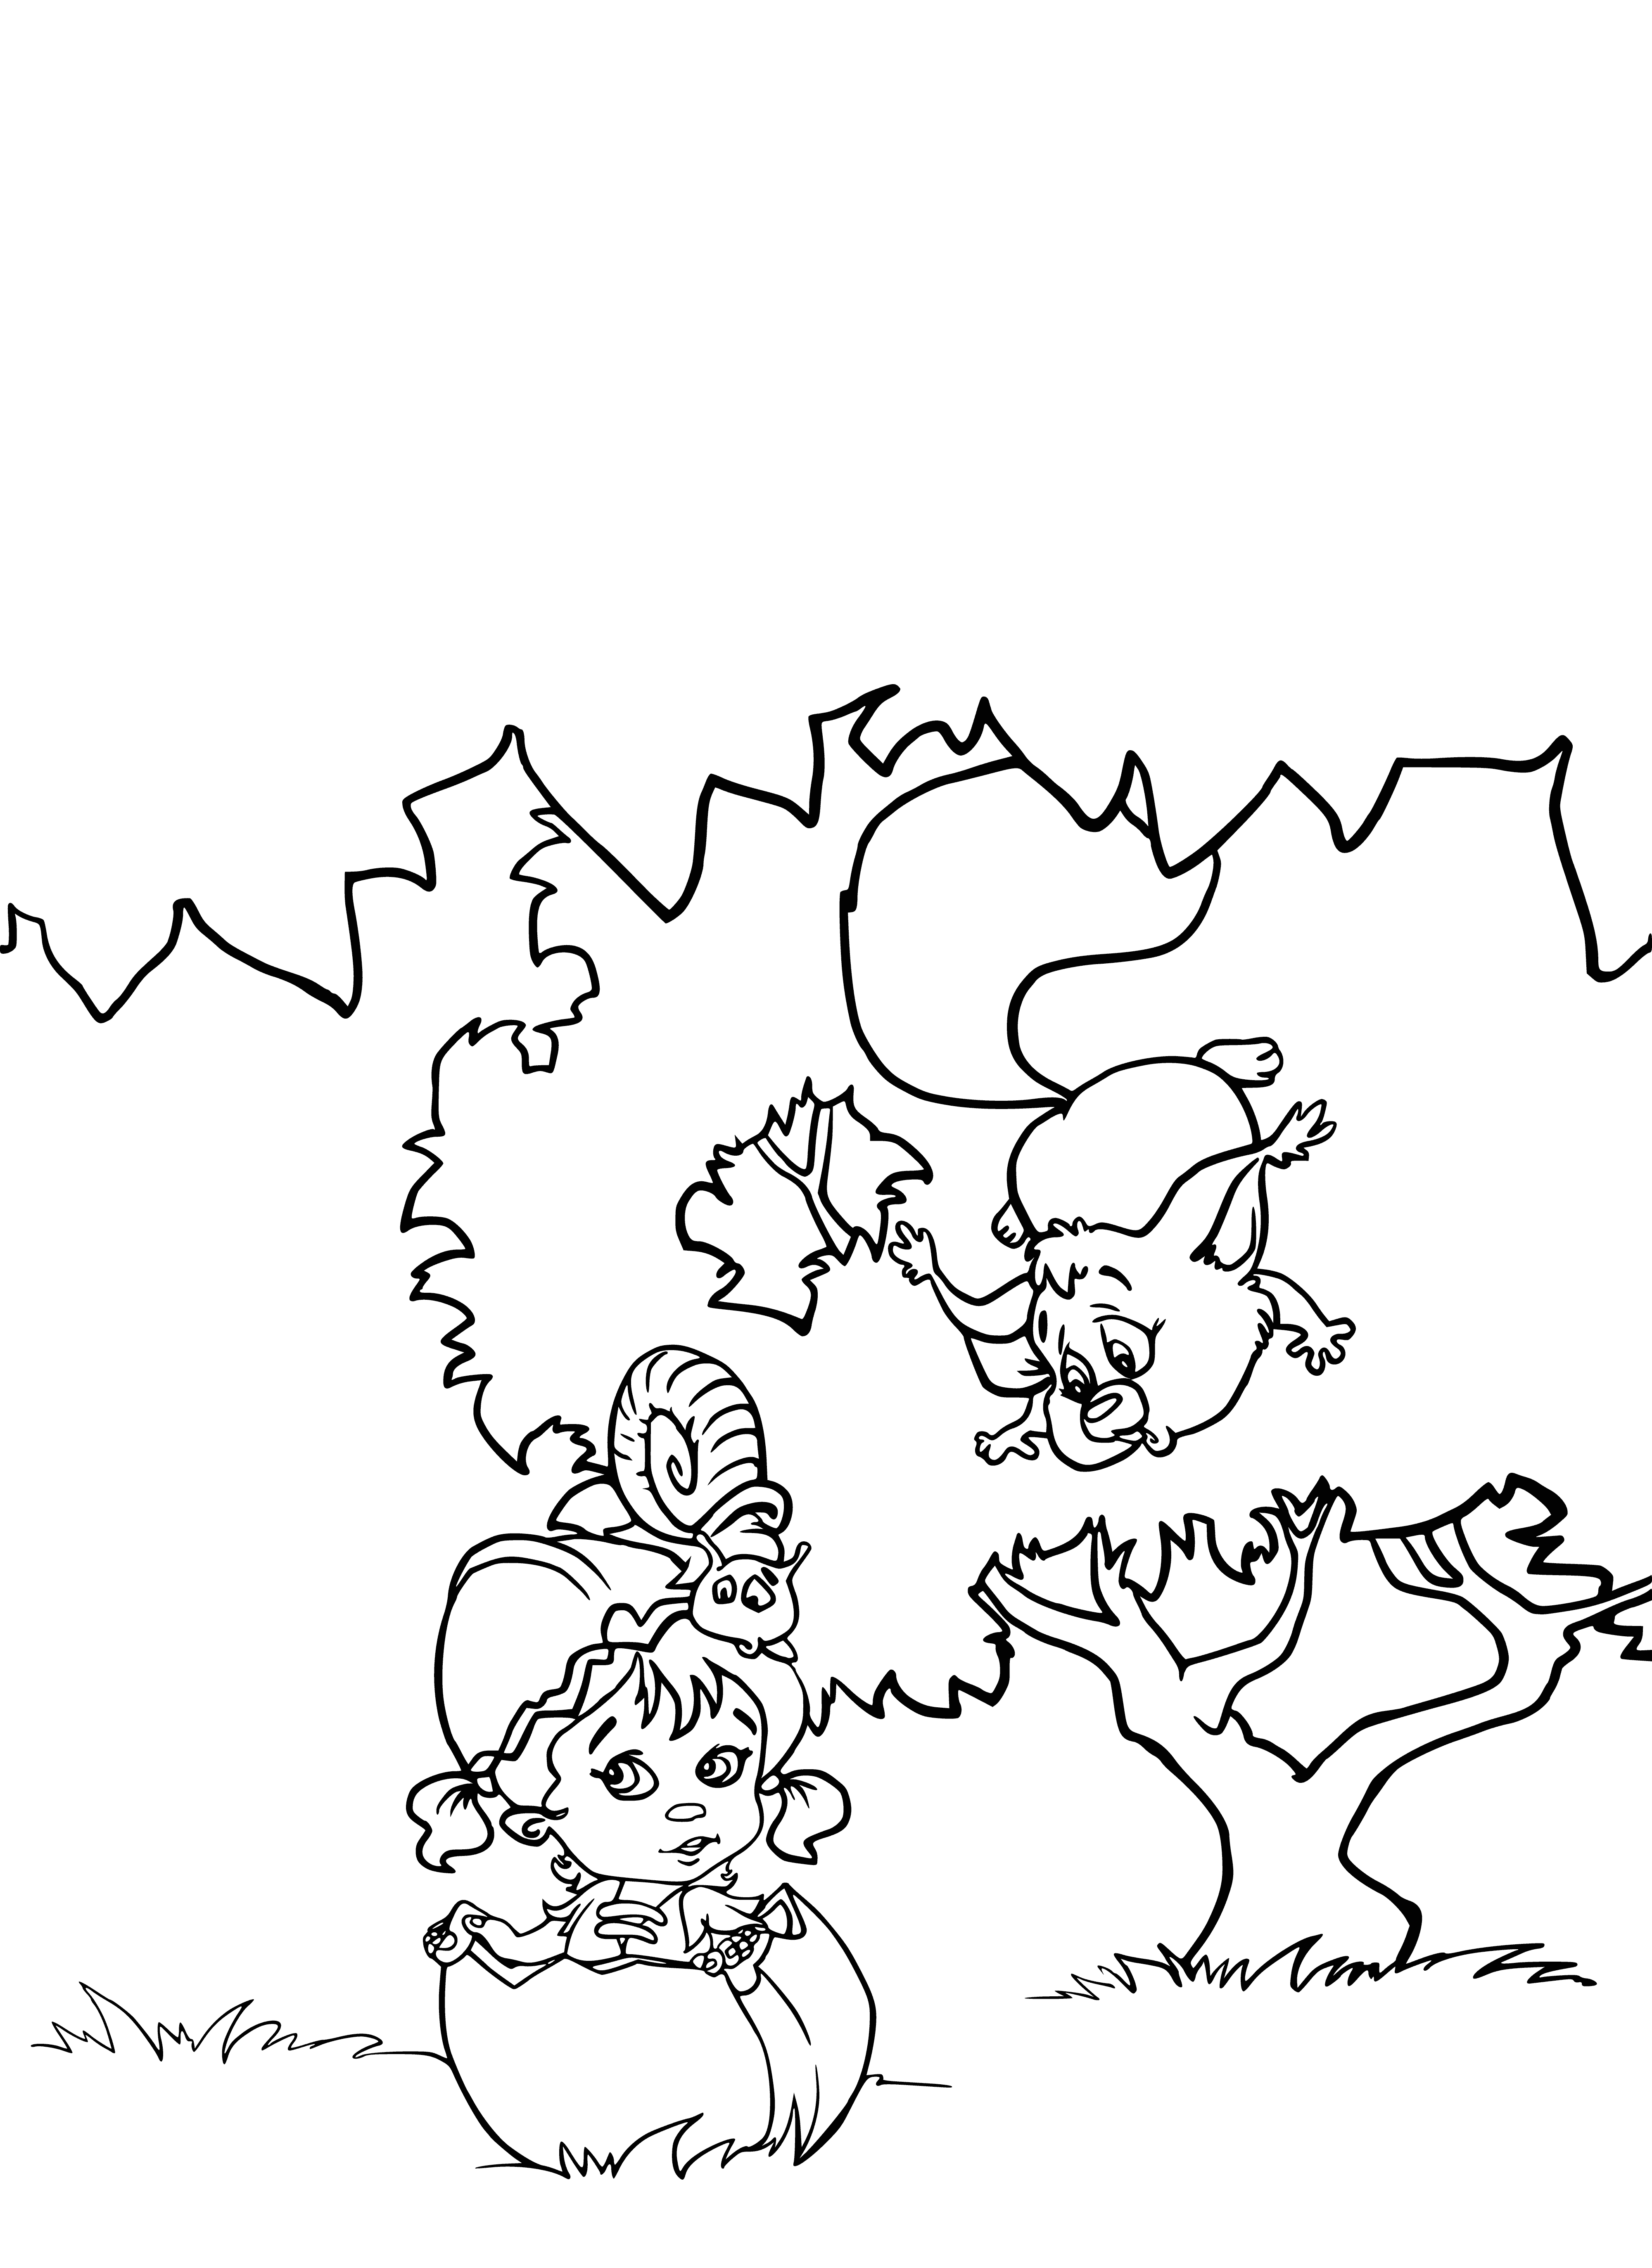 Nut coloring page